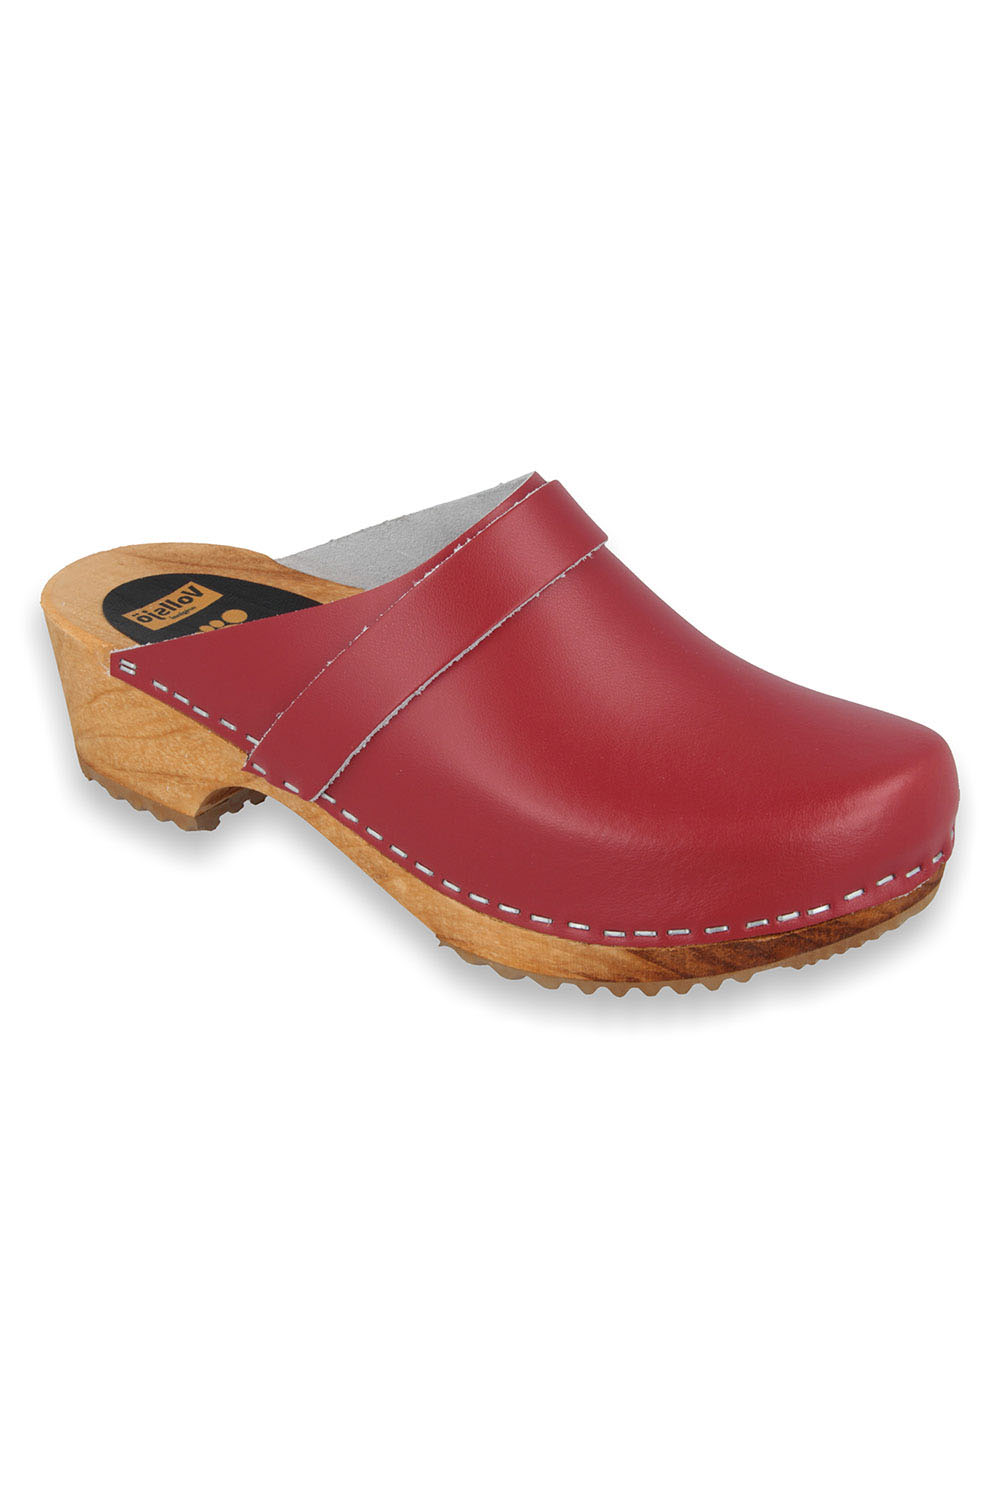 Genuine Leather Wooden Clogs Made in EU 